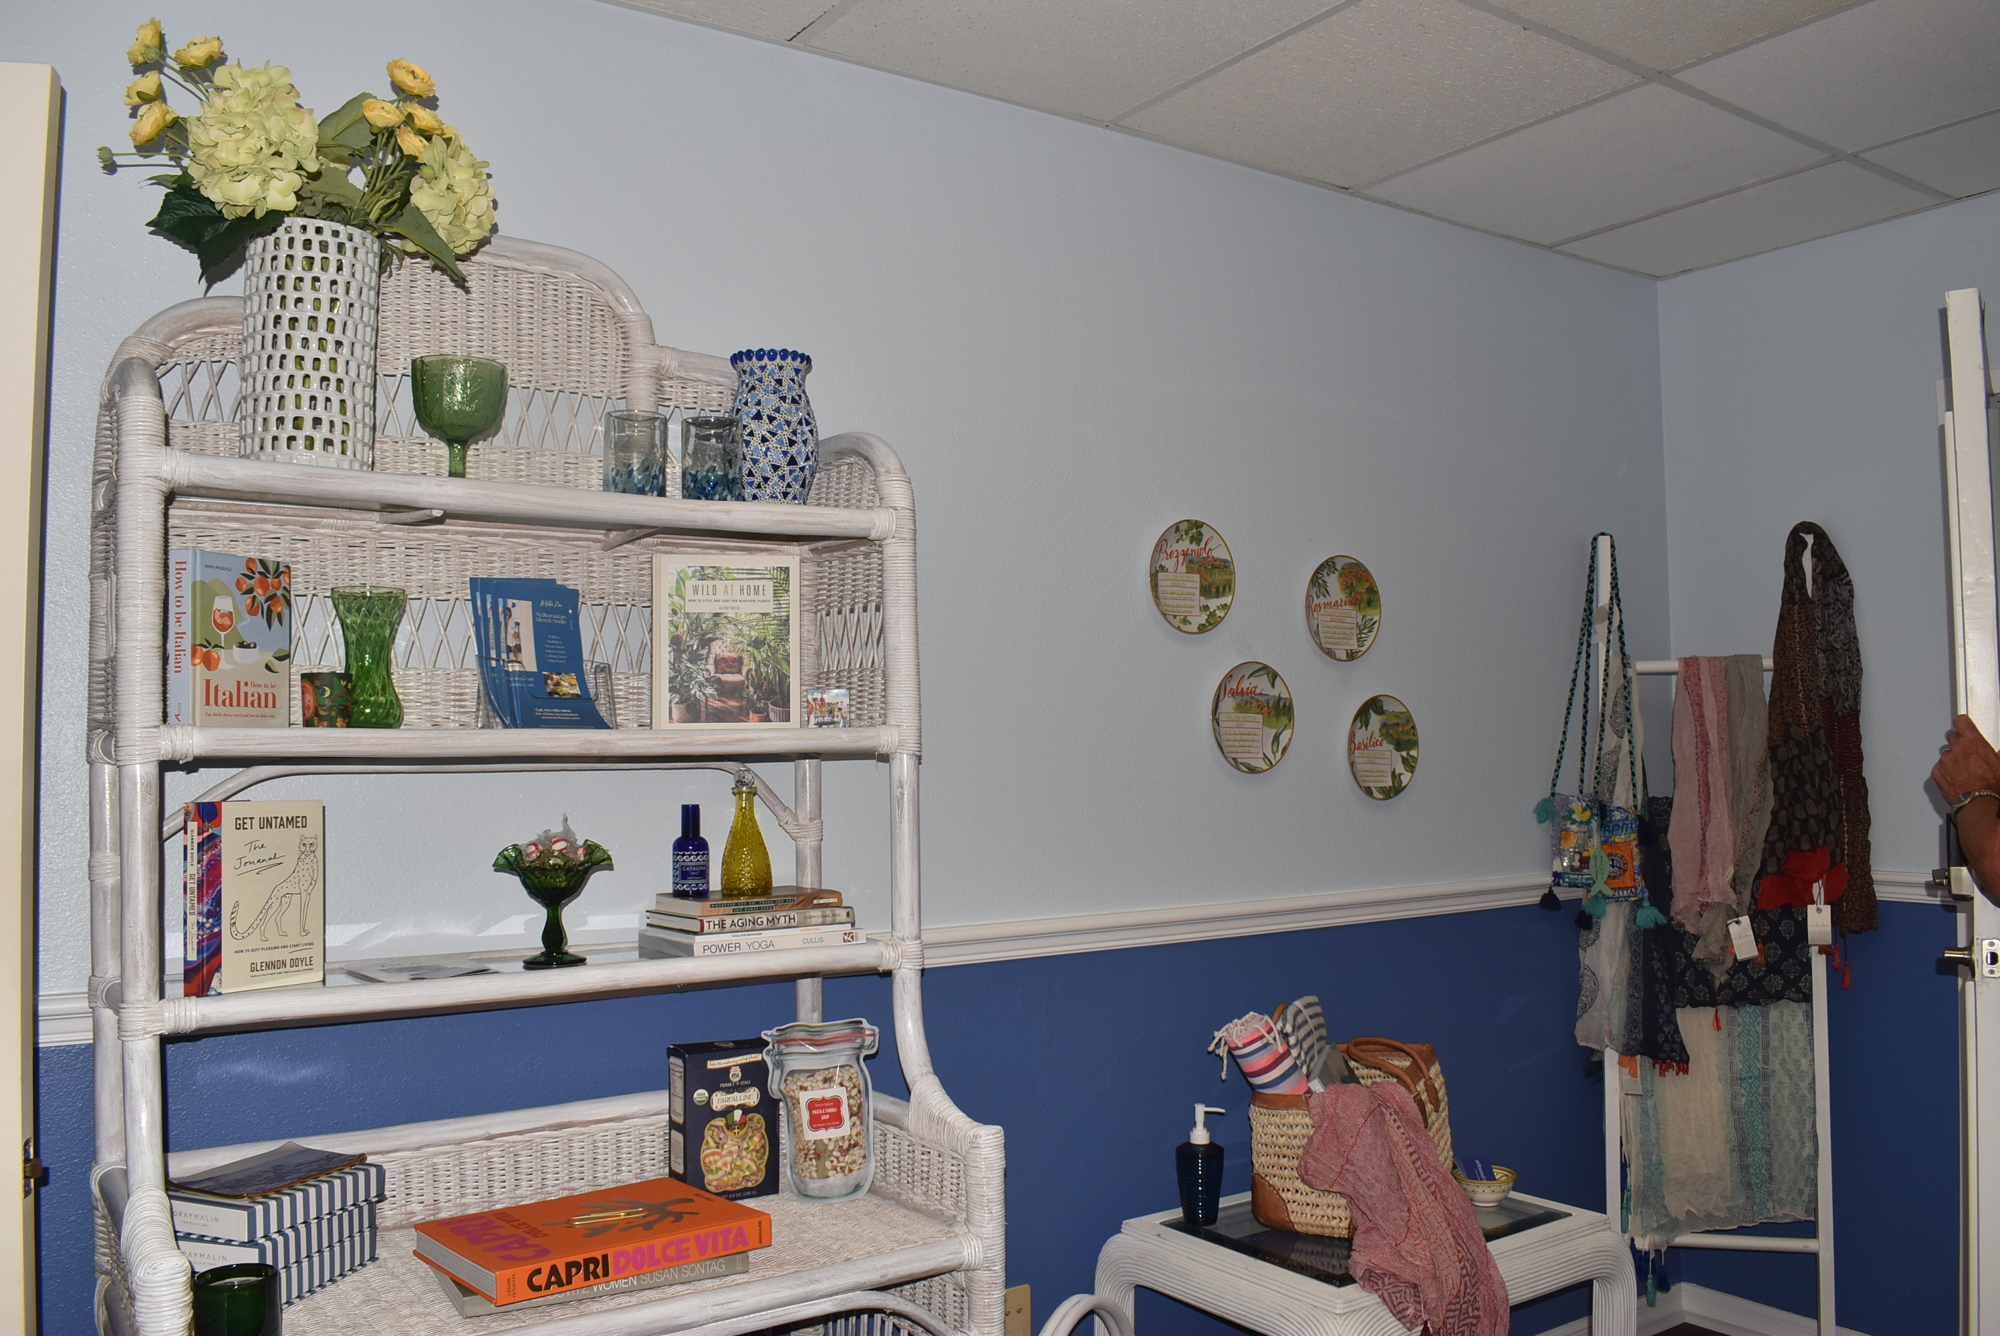 The space is decked out in calming blue and white with pops of yellow.